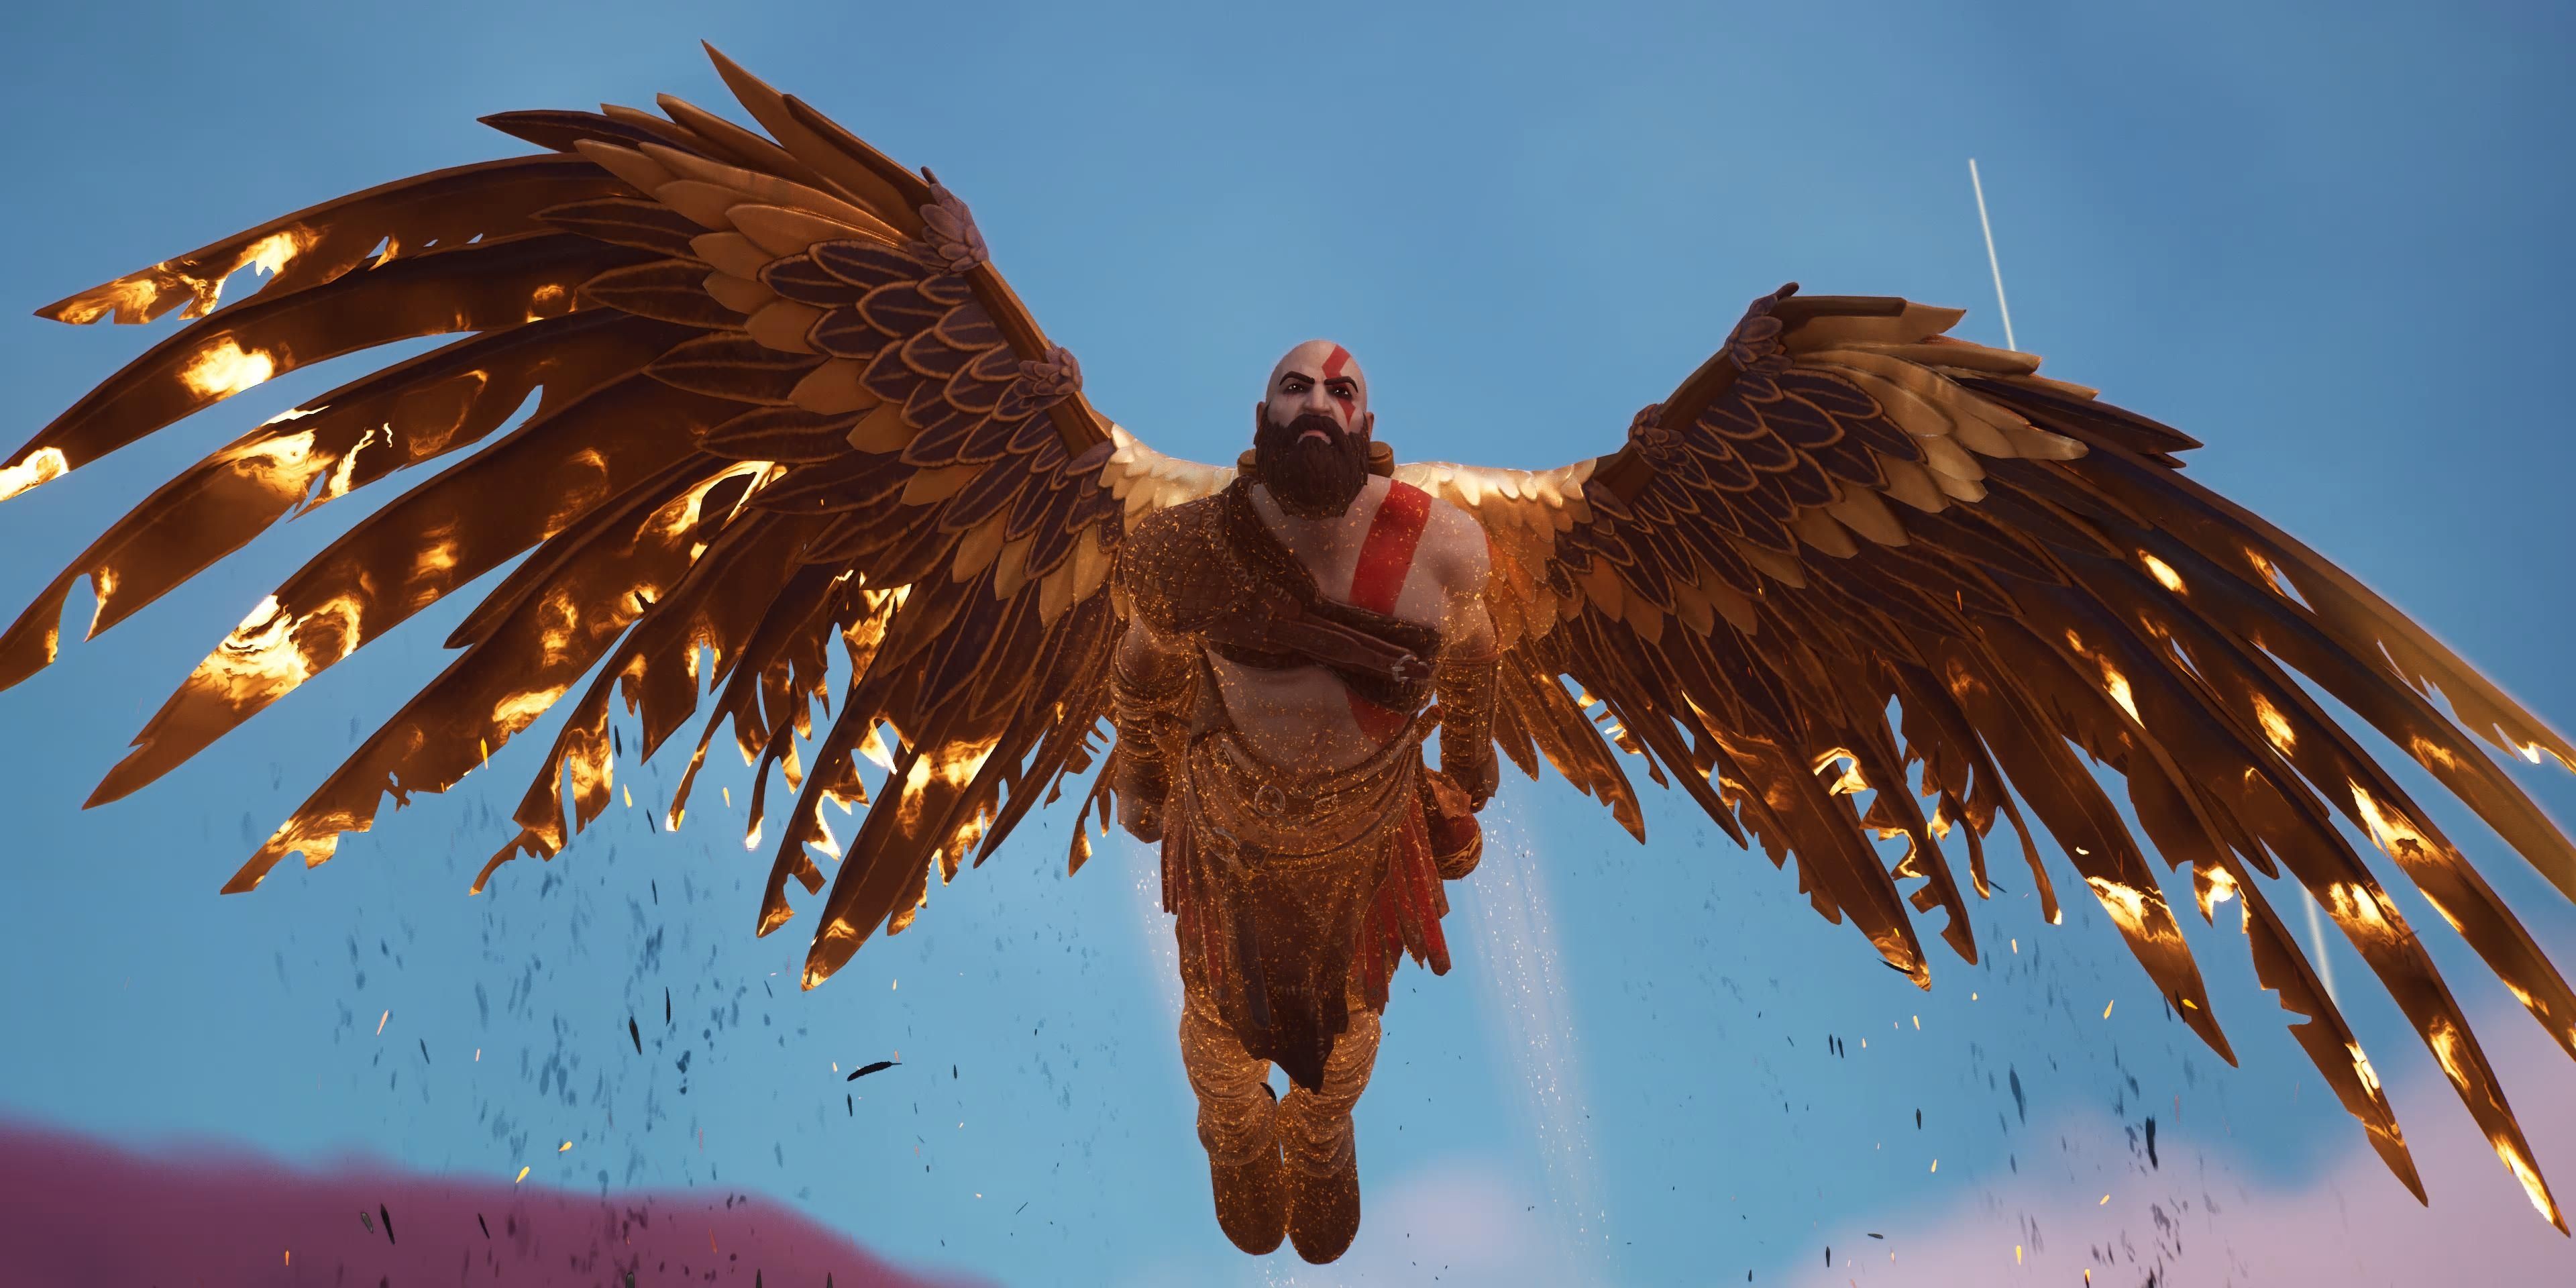 kratos using the wings of icarus